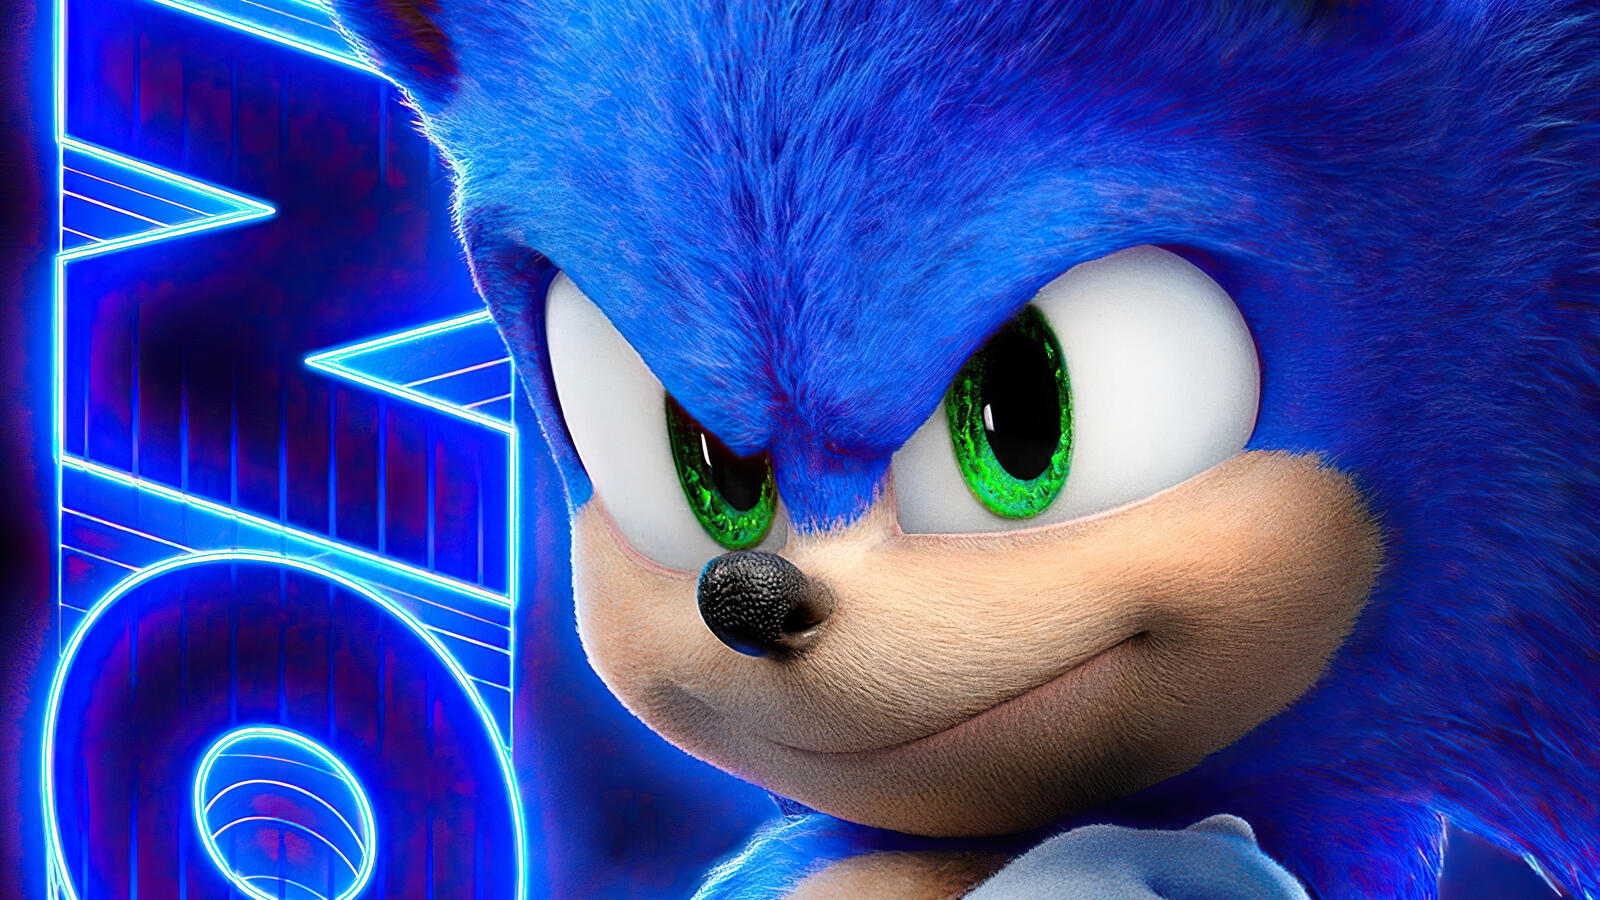 Wallpapers Sonic The Hedgehog movies 2020 Movies on the desktop